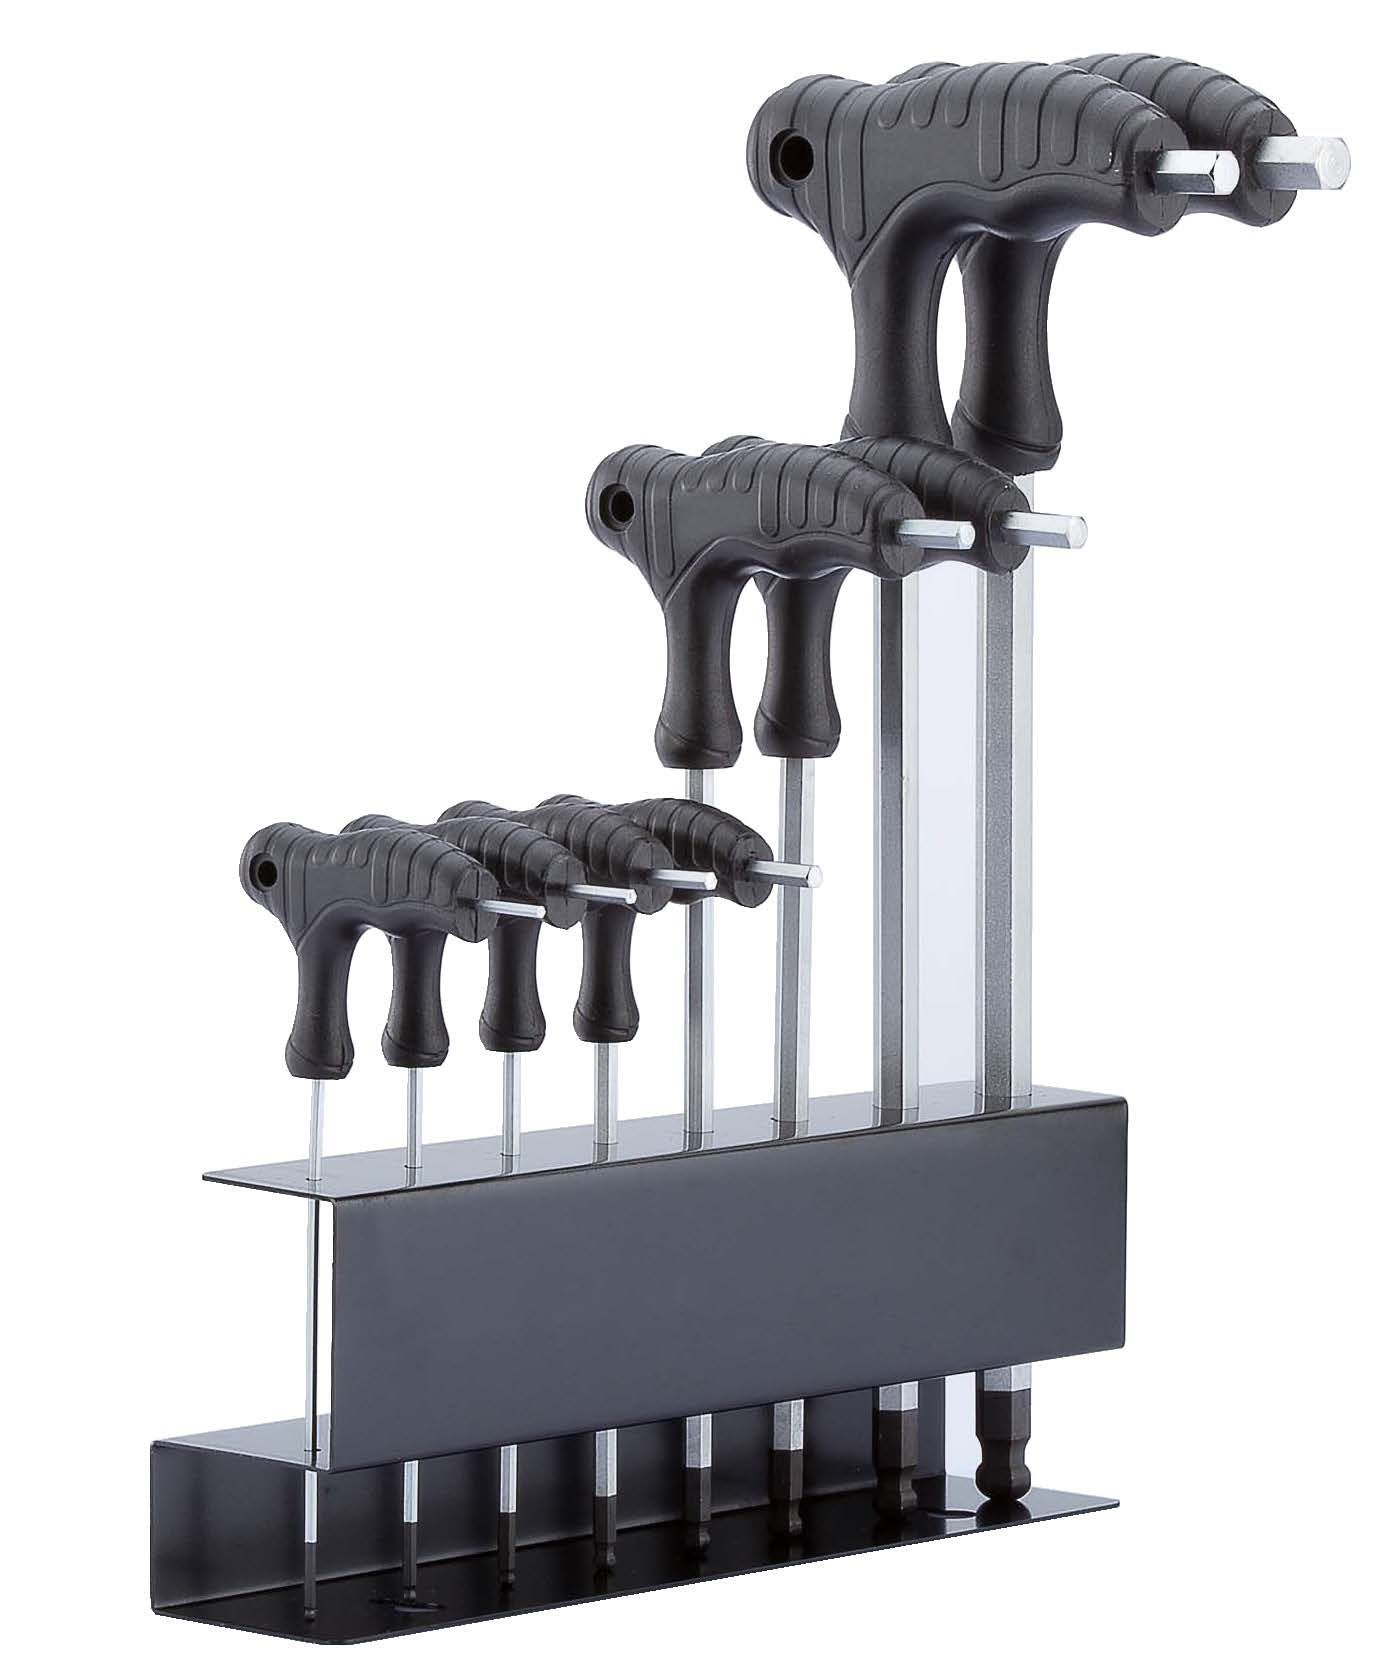 8-pack L-Type Hex wrench with ball end set